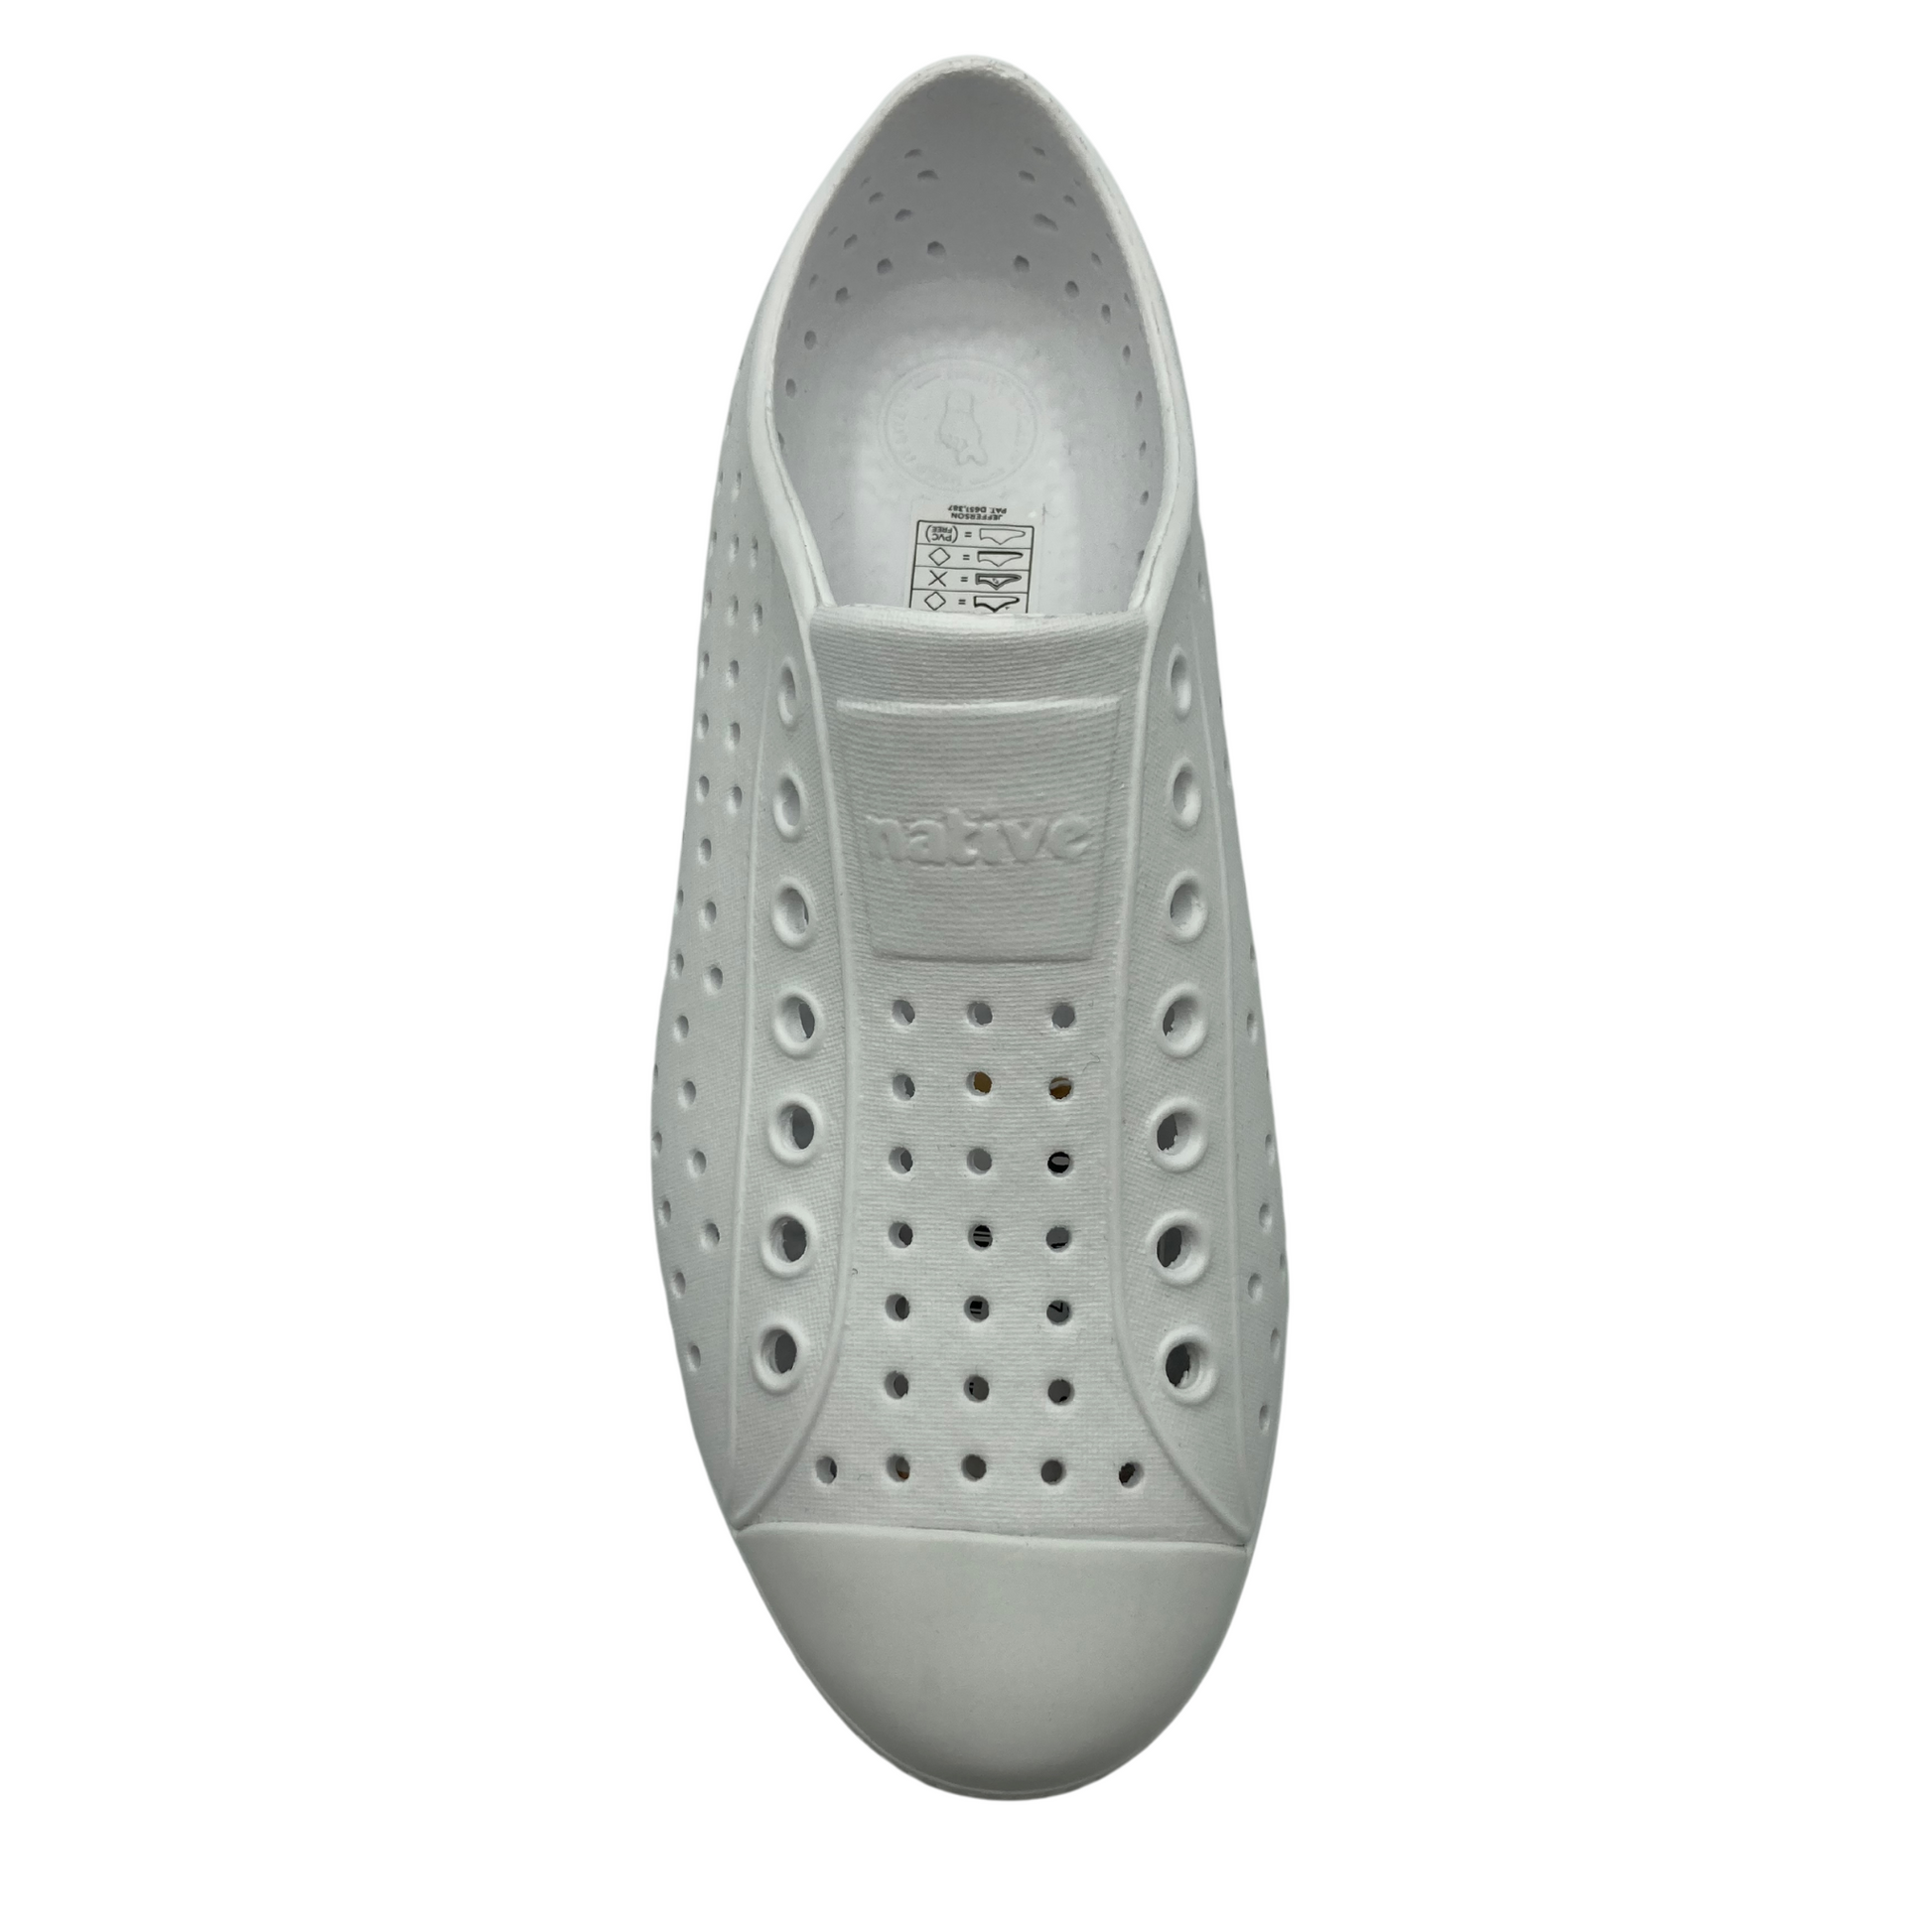 a white sneaker is pictured from above with small and large rows of perforations, a plain solid toe box and box with the brands name - "native" - on the tongue.